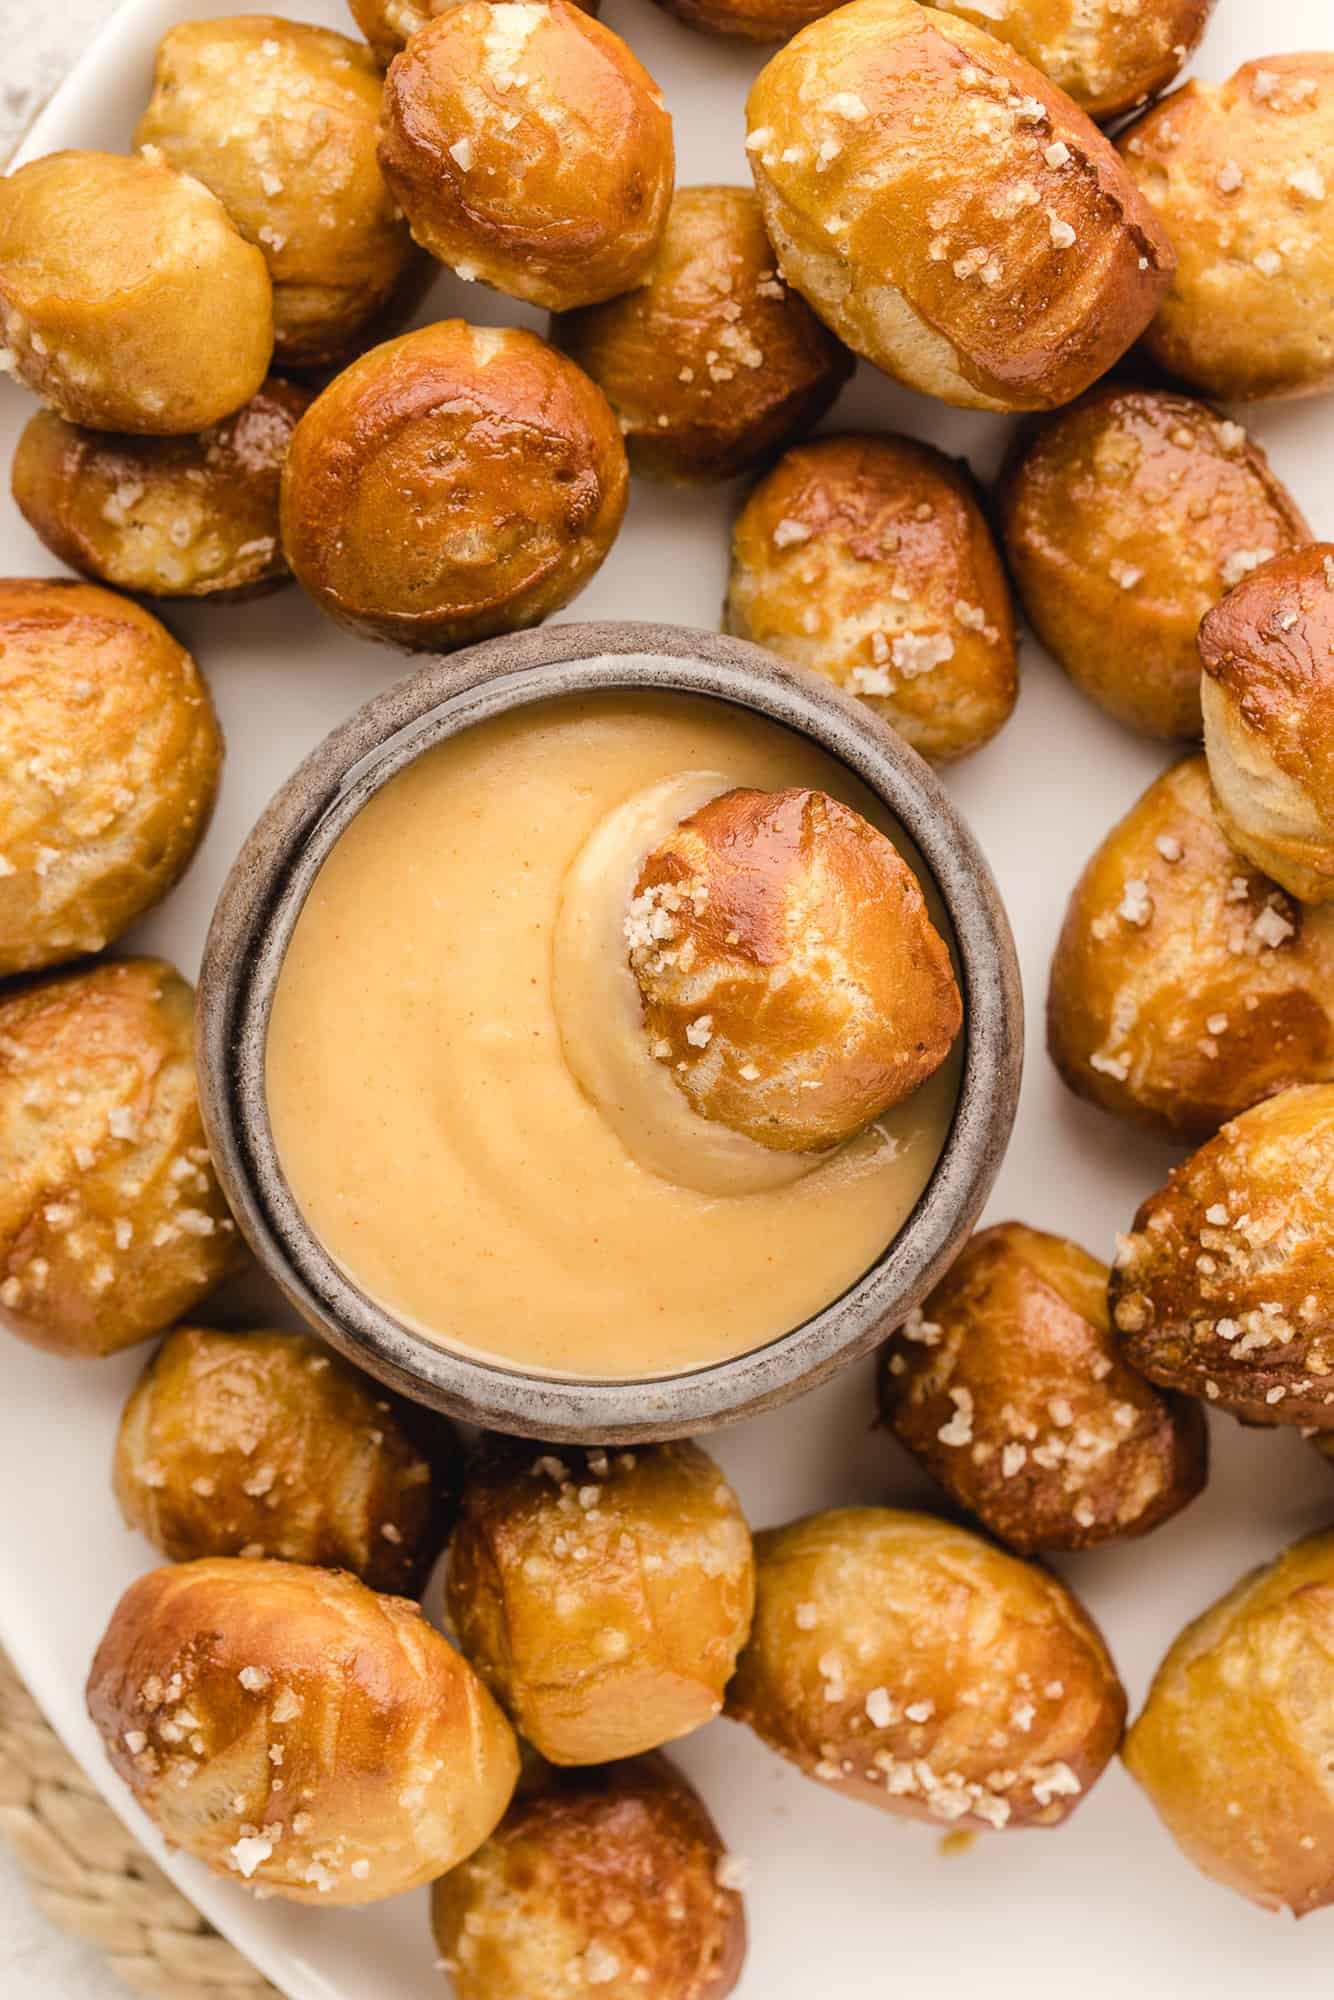 Overhead view of a pretzel bite dipped in a bowl of cheese sauce, surrounded by more pretzel bites on a white plate.